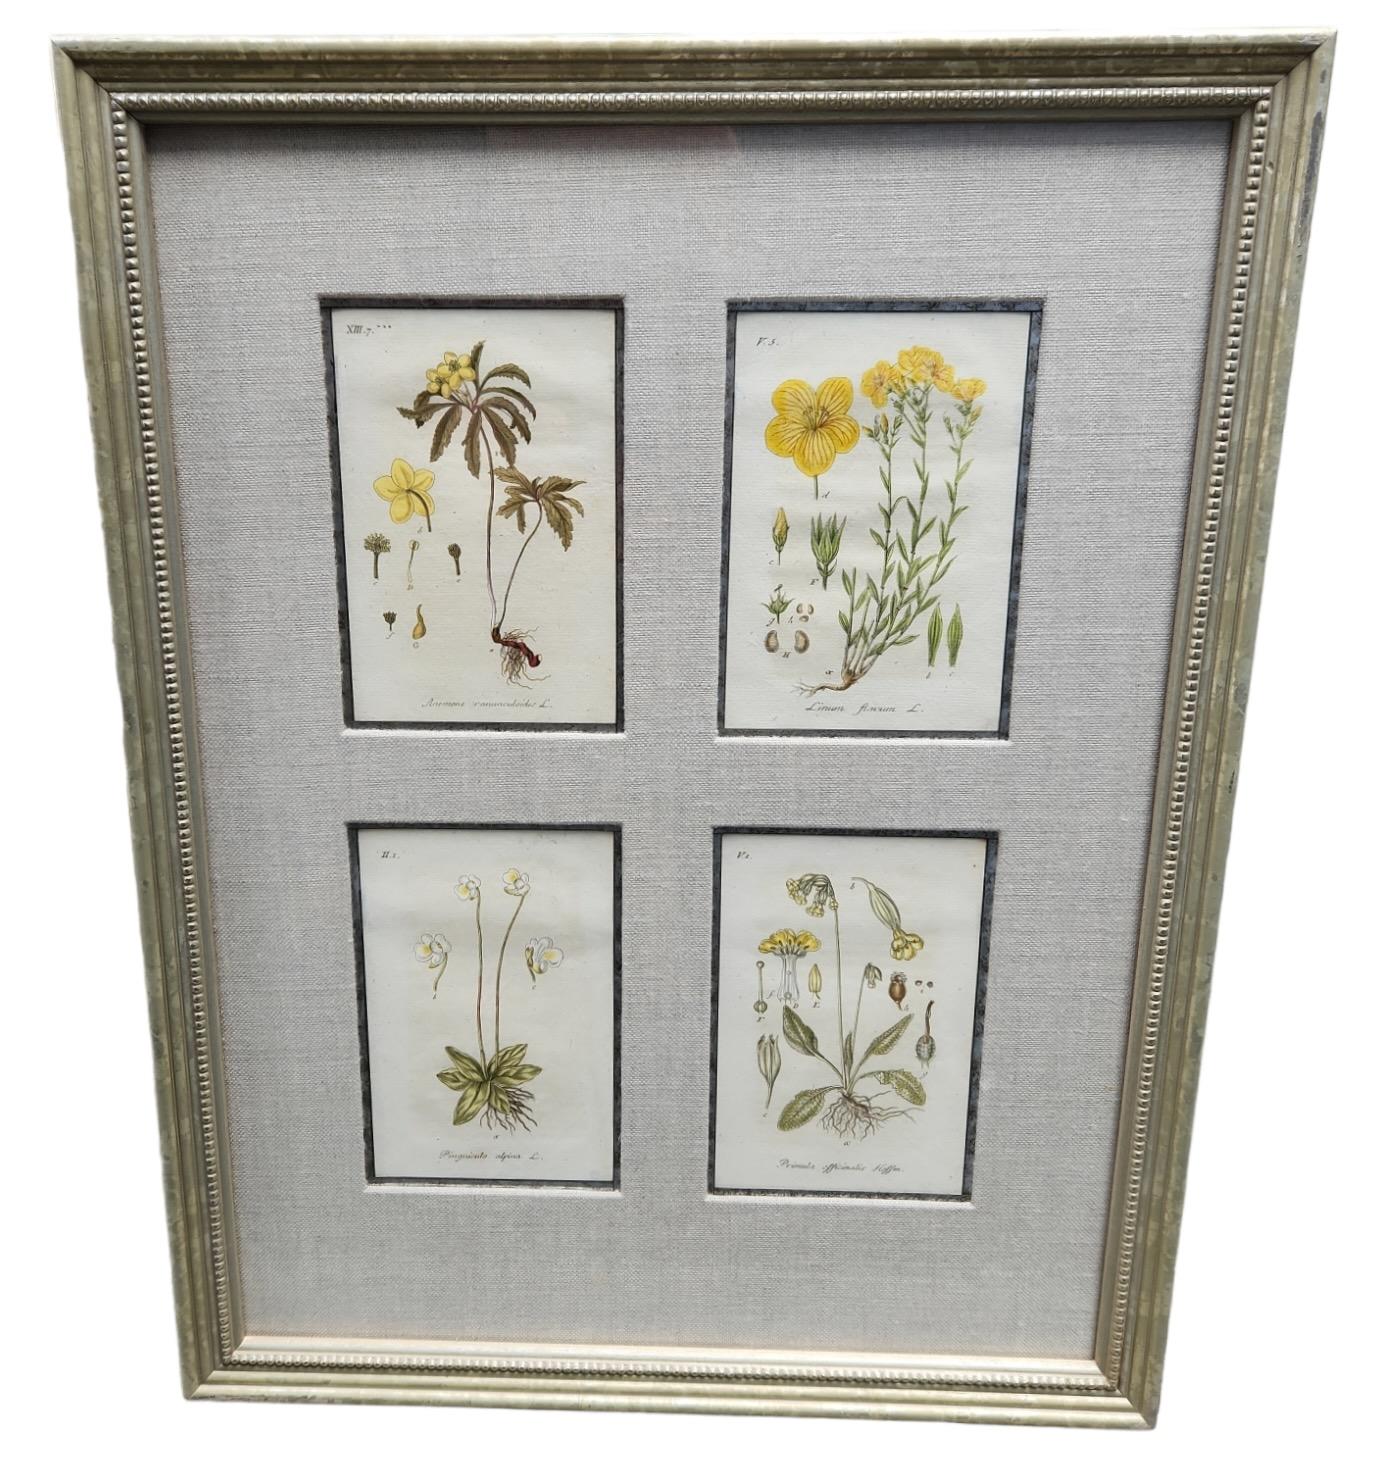 Hand tinted botanical lithographs. Framed and matted with linen. Four individual lithographs within one frame. 12 available.